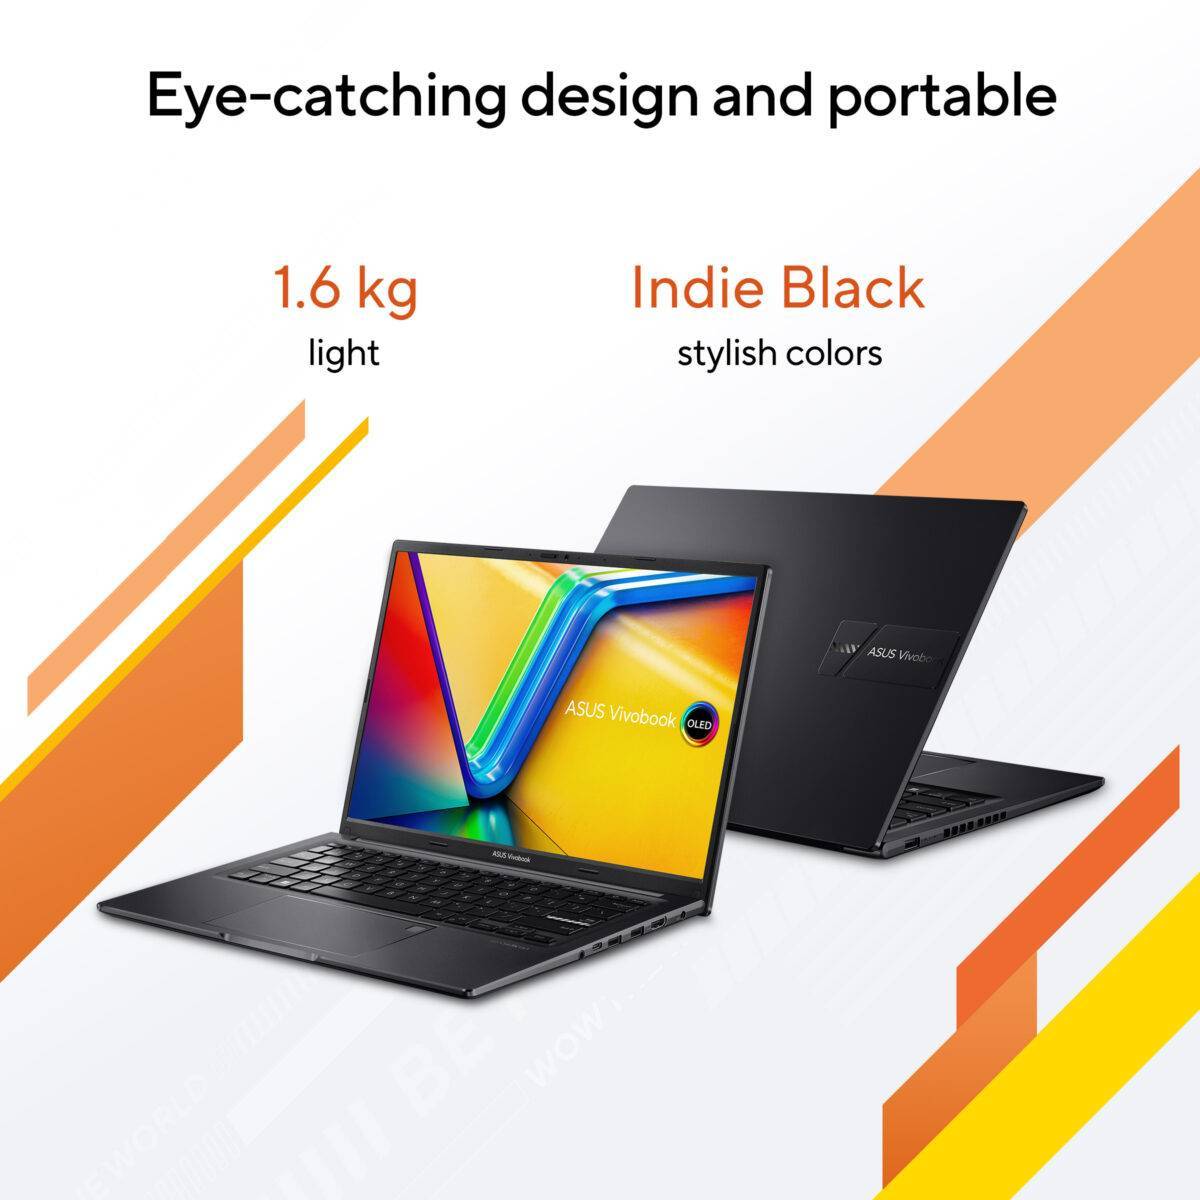 ASUS Vivobook 14 OLED M1405YA-KM741WS / M1405YA-KM541WS Fast charging support, you can charge a low battery to 60% in as little as 49 minutes so you’ll be up and running quicker than ever.